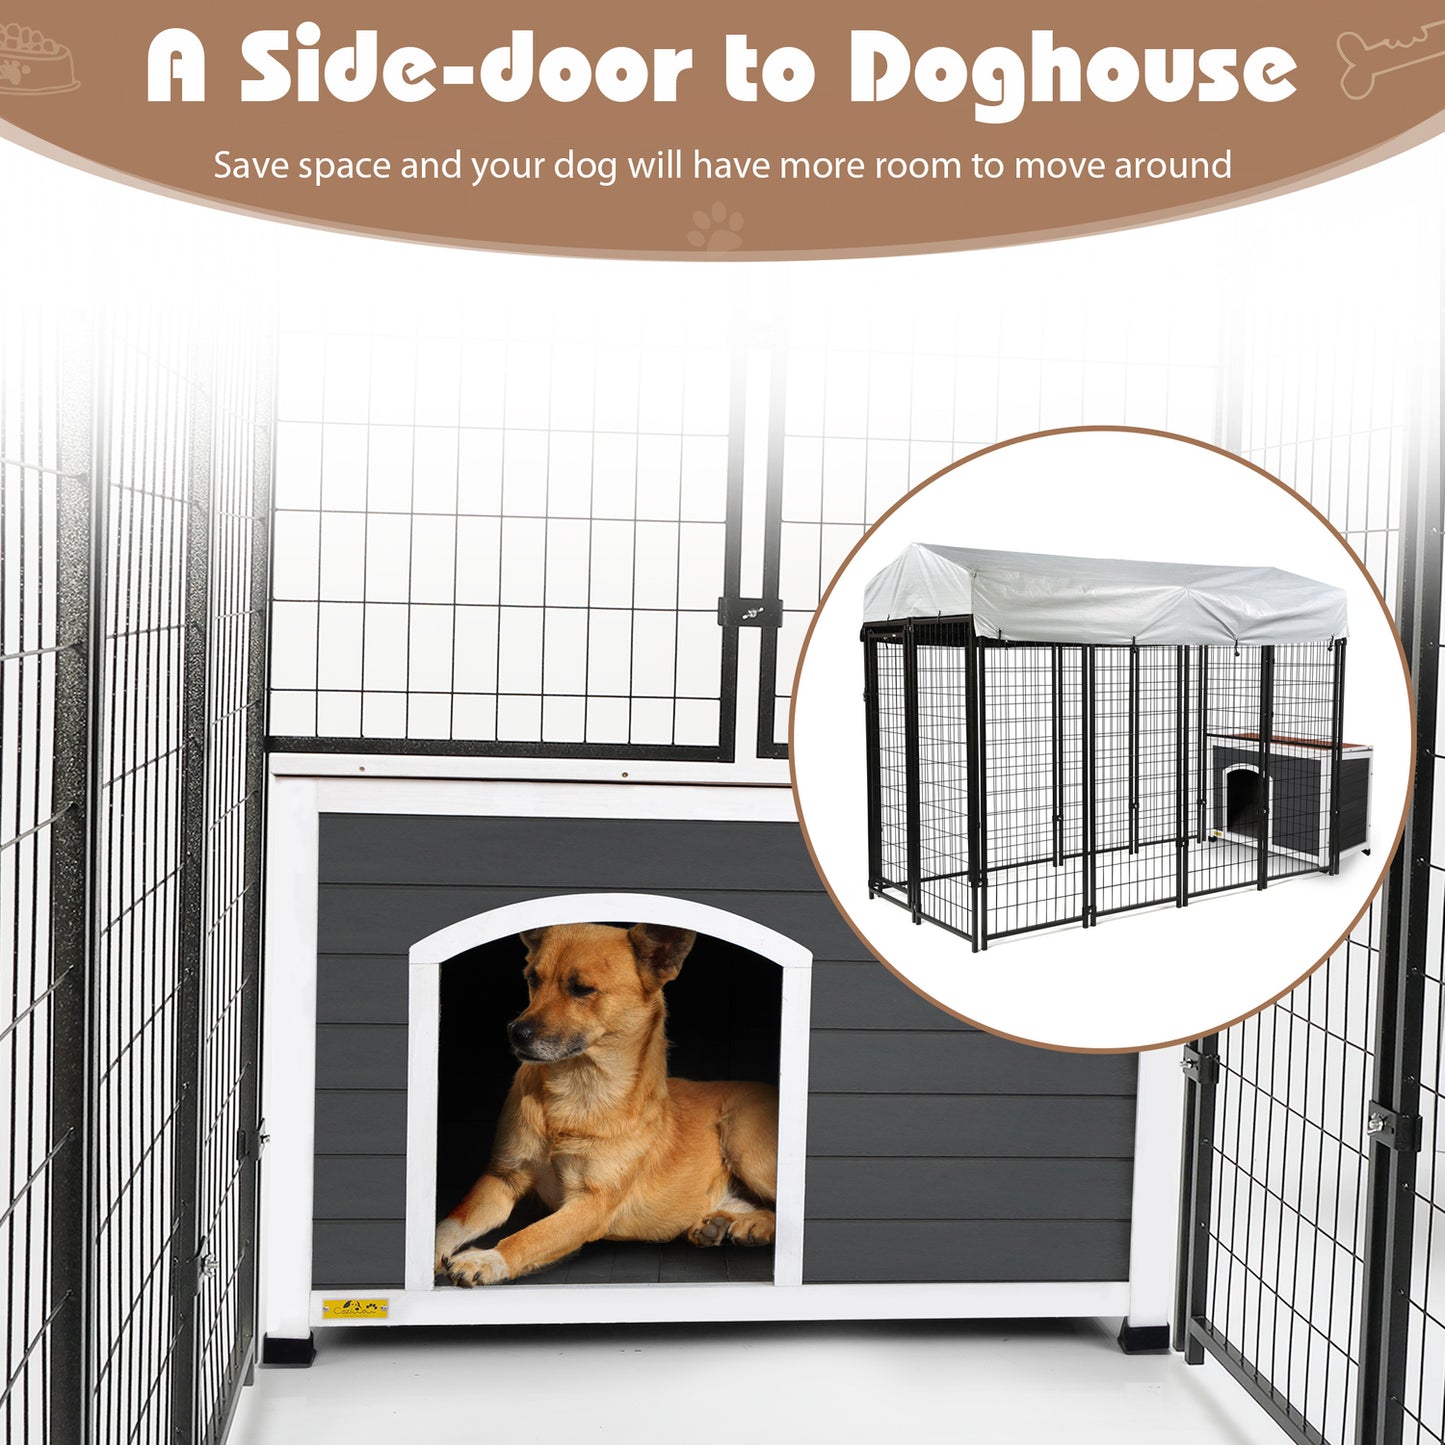 Coziwow 7'X 3'X 6' Outdoor Dog Kennel Enclosure with Dog House, Waterproof Cover